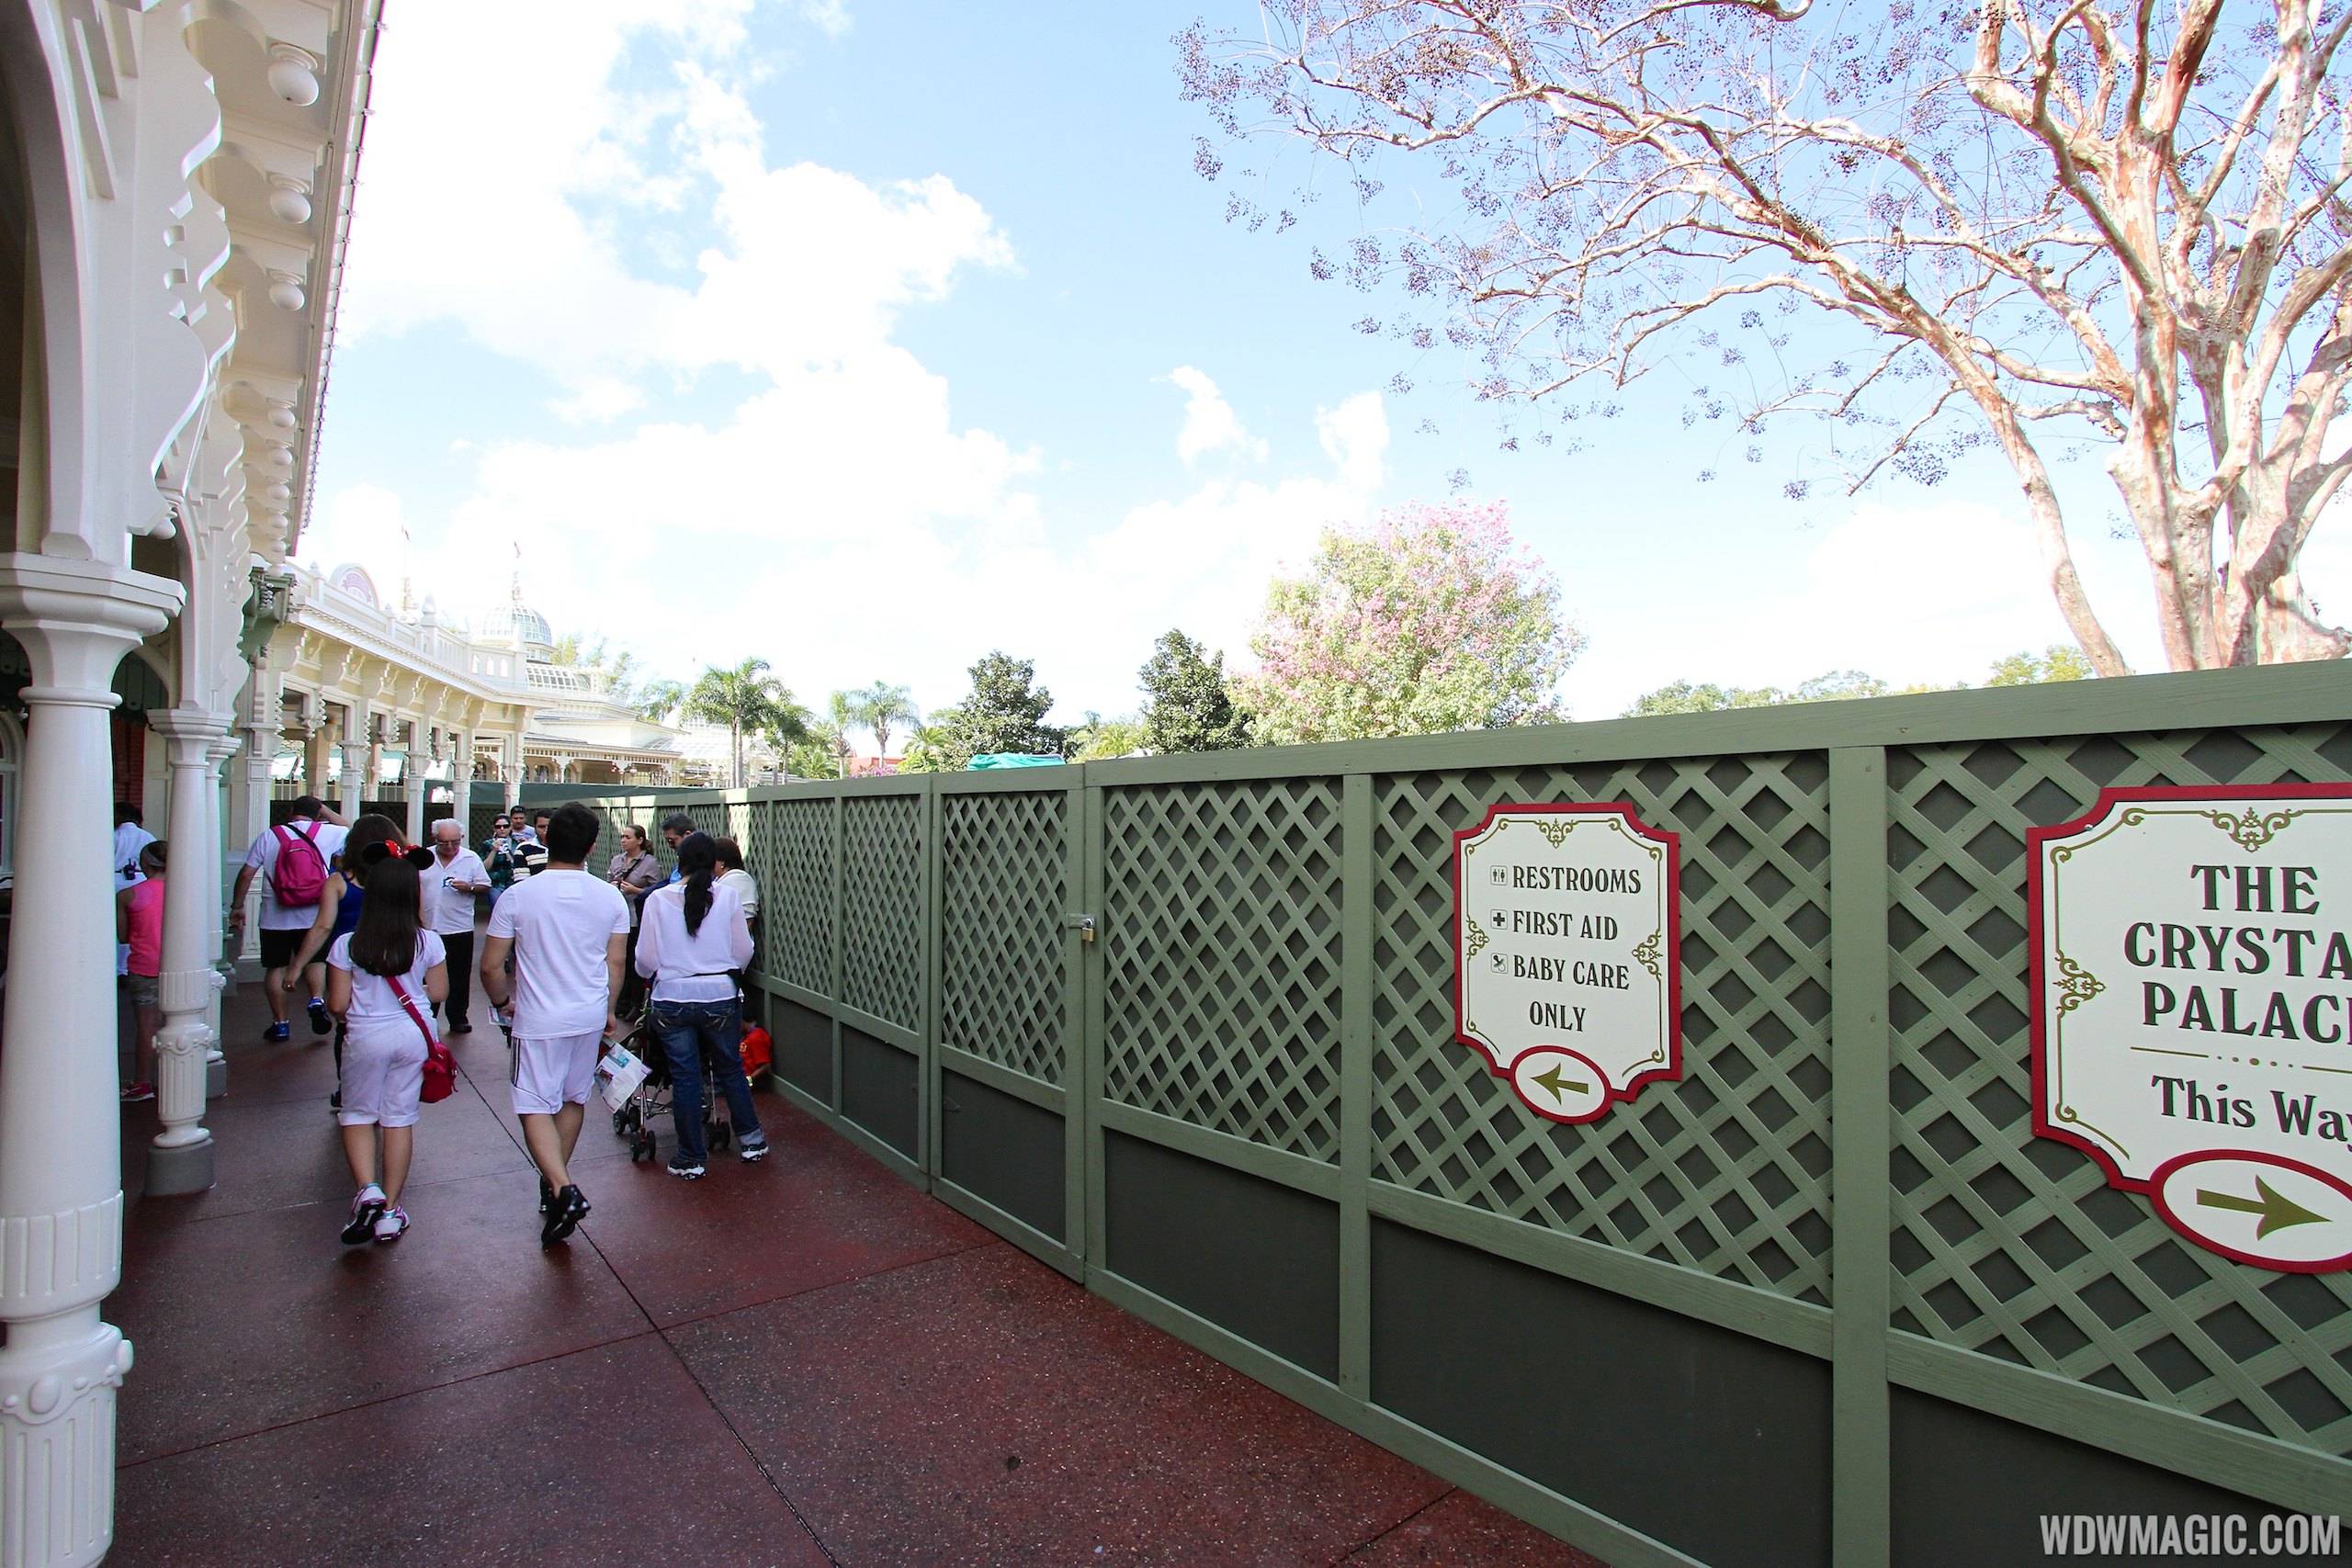 PHOTOS - A look at the Casey's Corner outdoor seating area expansion at the Magic Kingdom